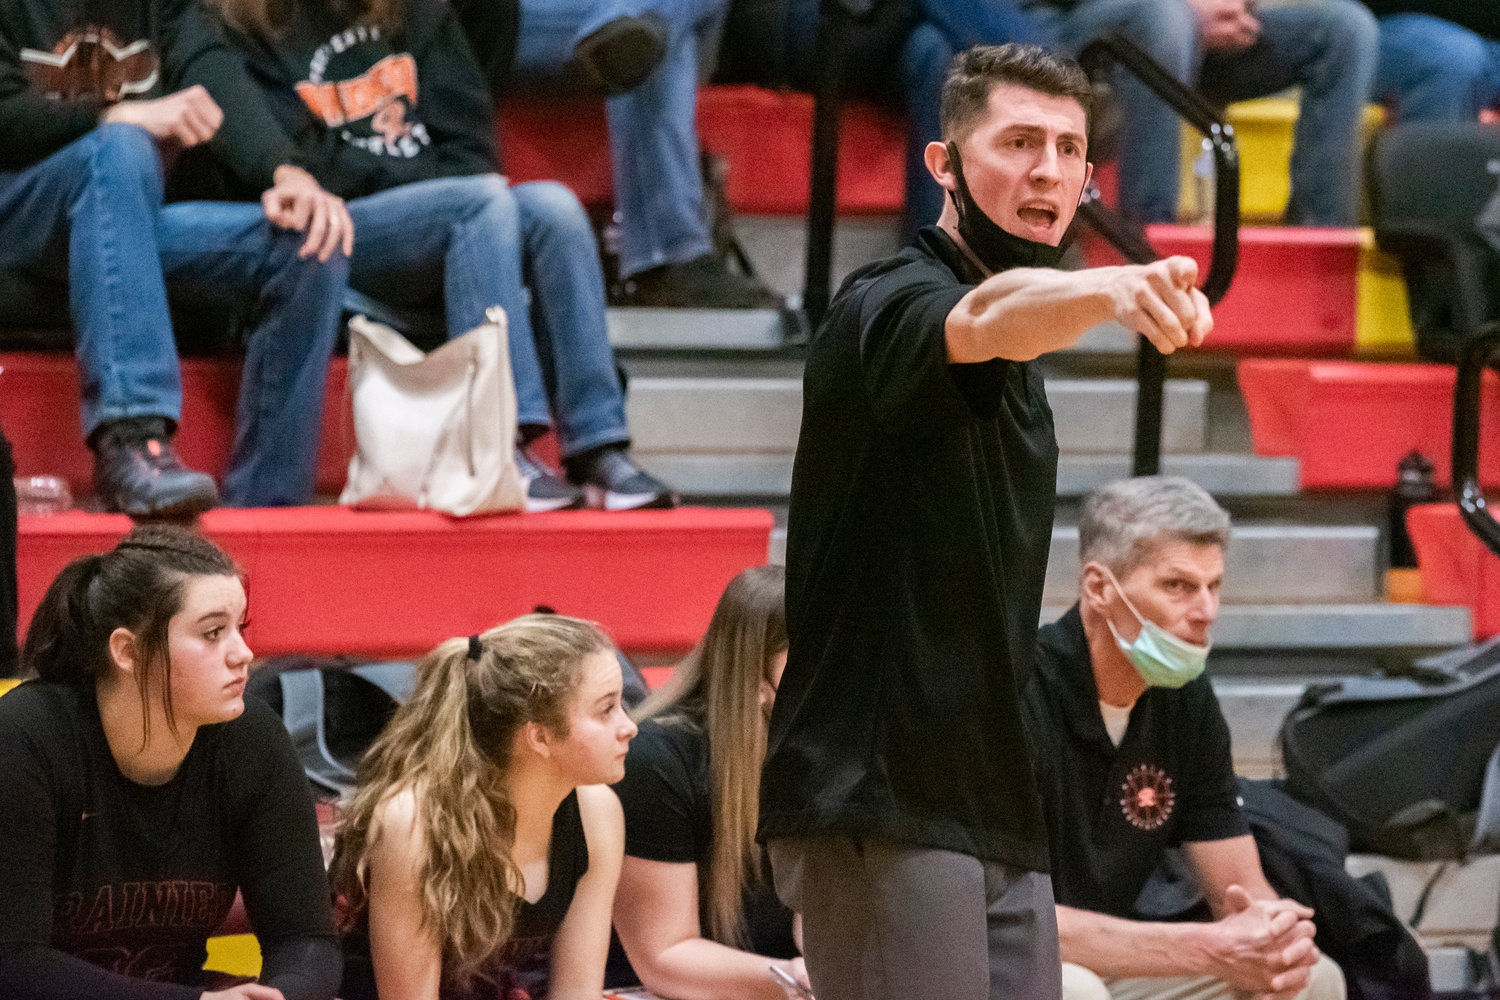 Rainier Head Coach Brandon Eygabroad yells to players on the court during a game Wednesday night in Winlock.